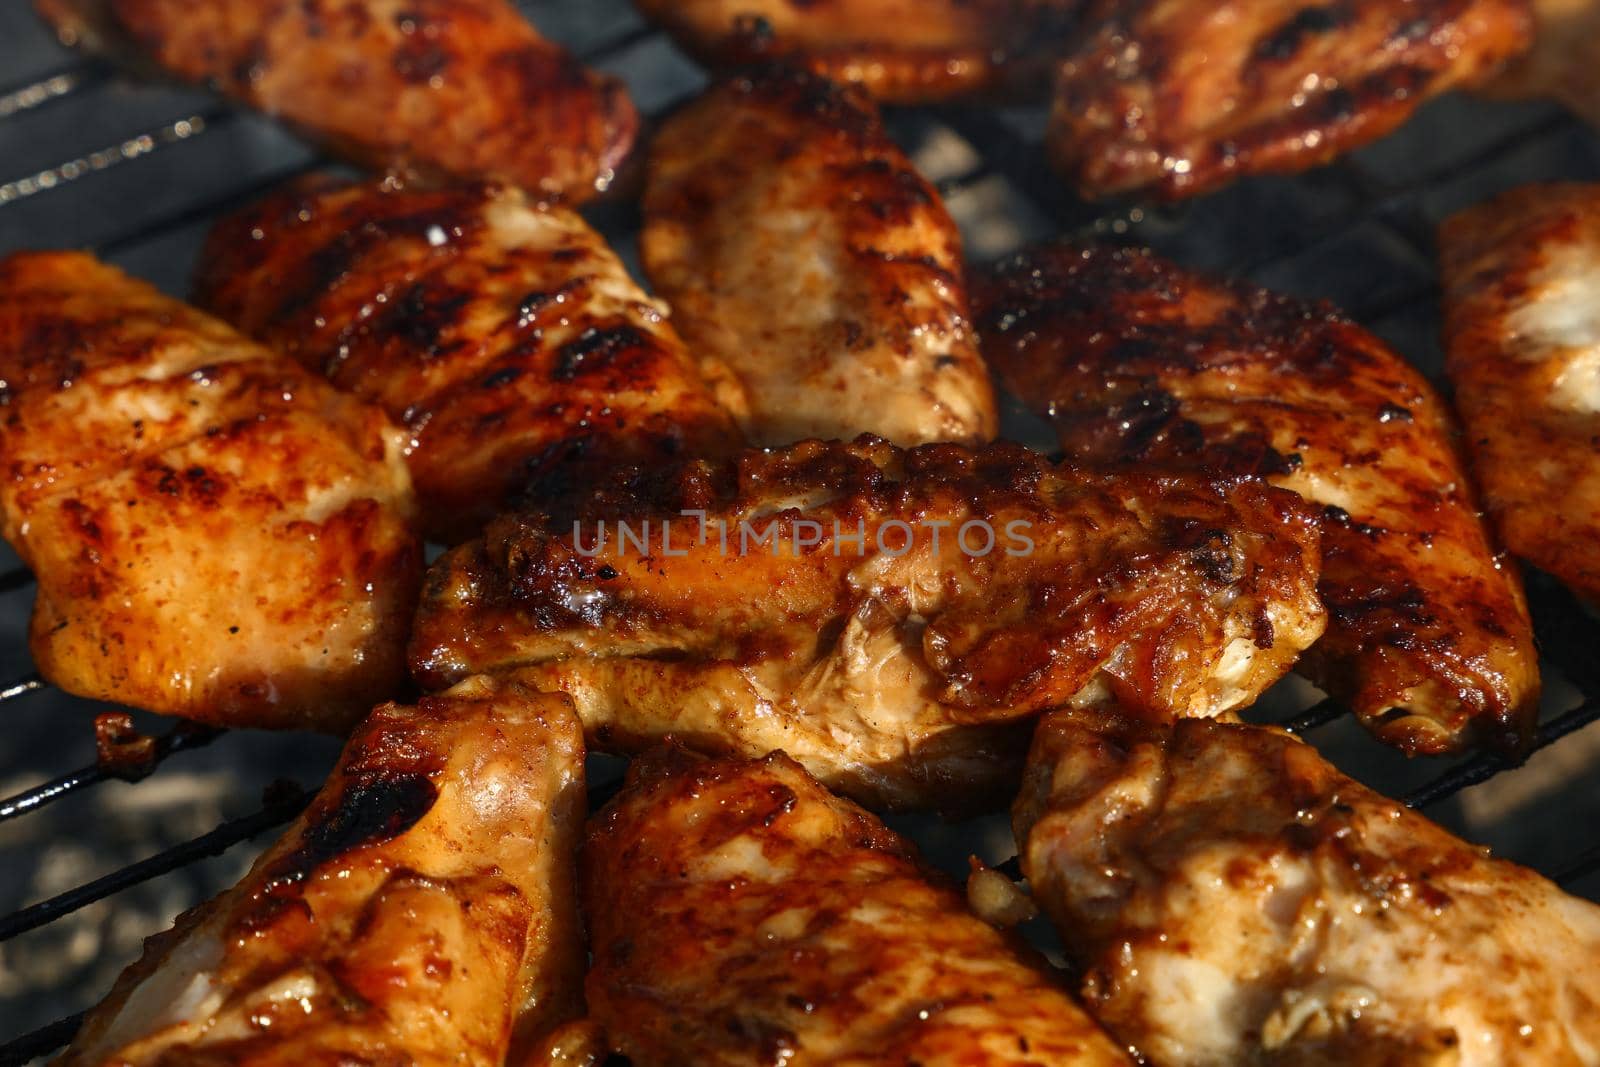 Close up cooking and smoking chicken buffalo or teriyaki sauce wings on bbq char grill, high angle view